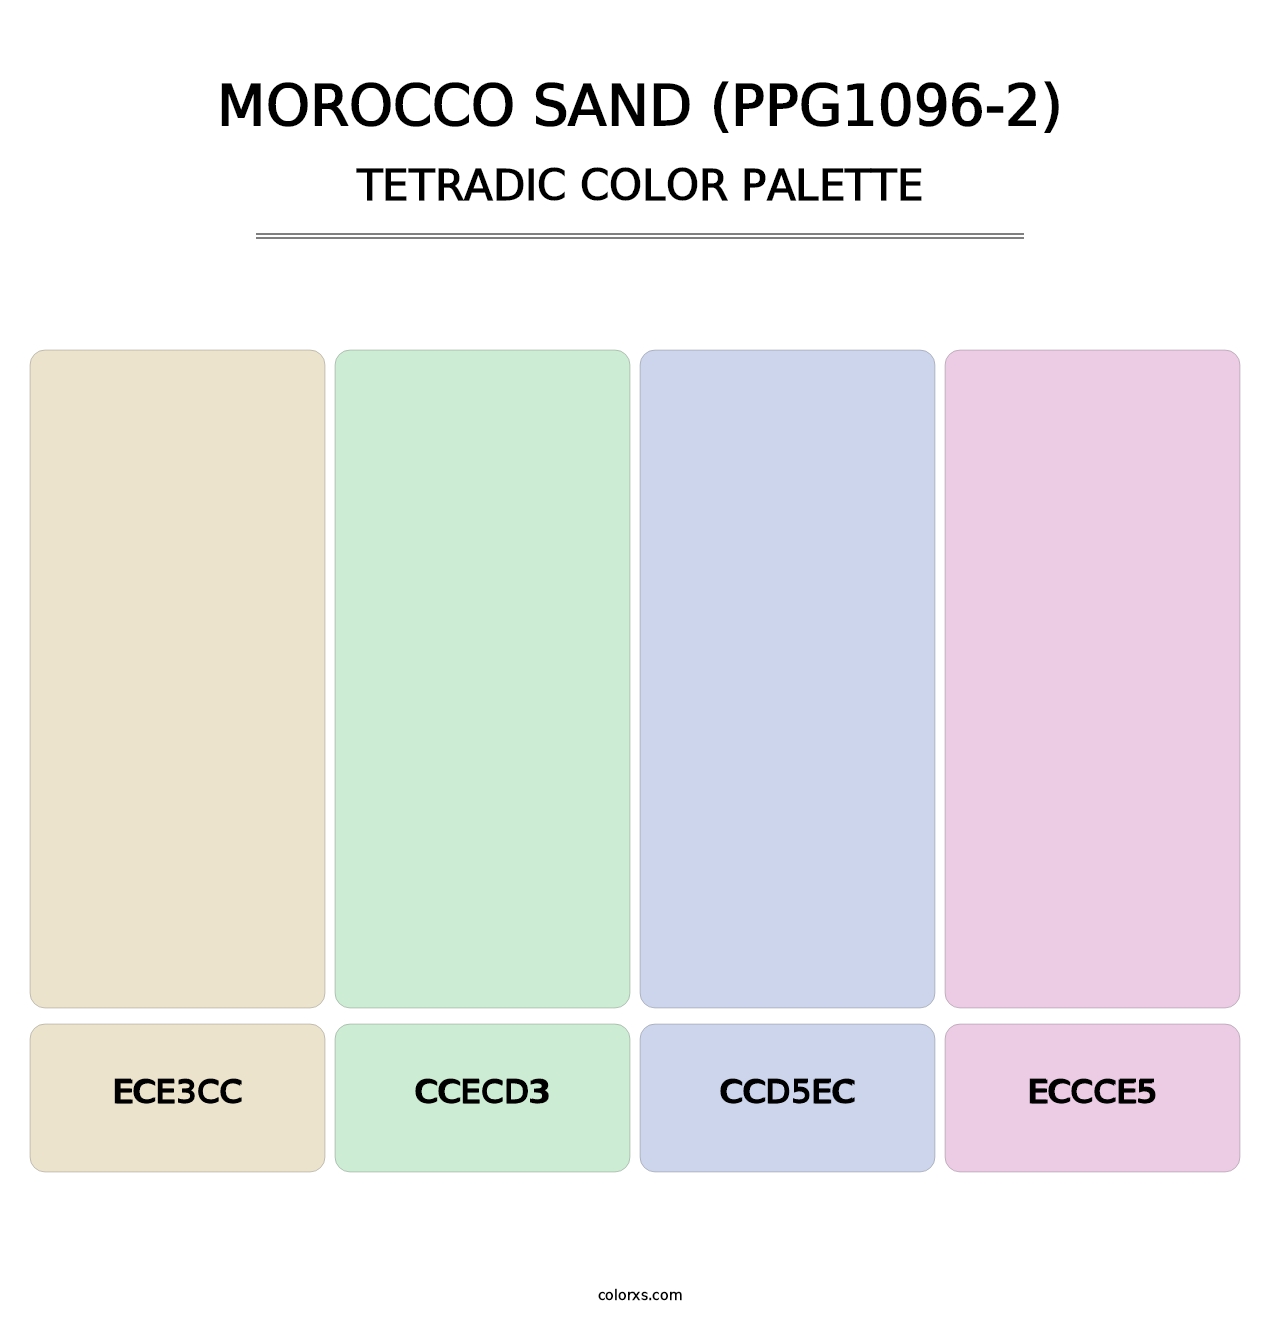 Morocco Sand (PPG1096-2) - Tetradic Color Palette